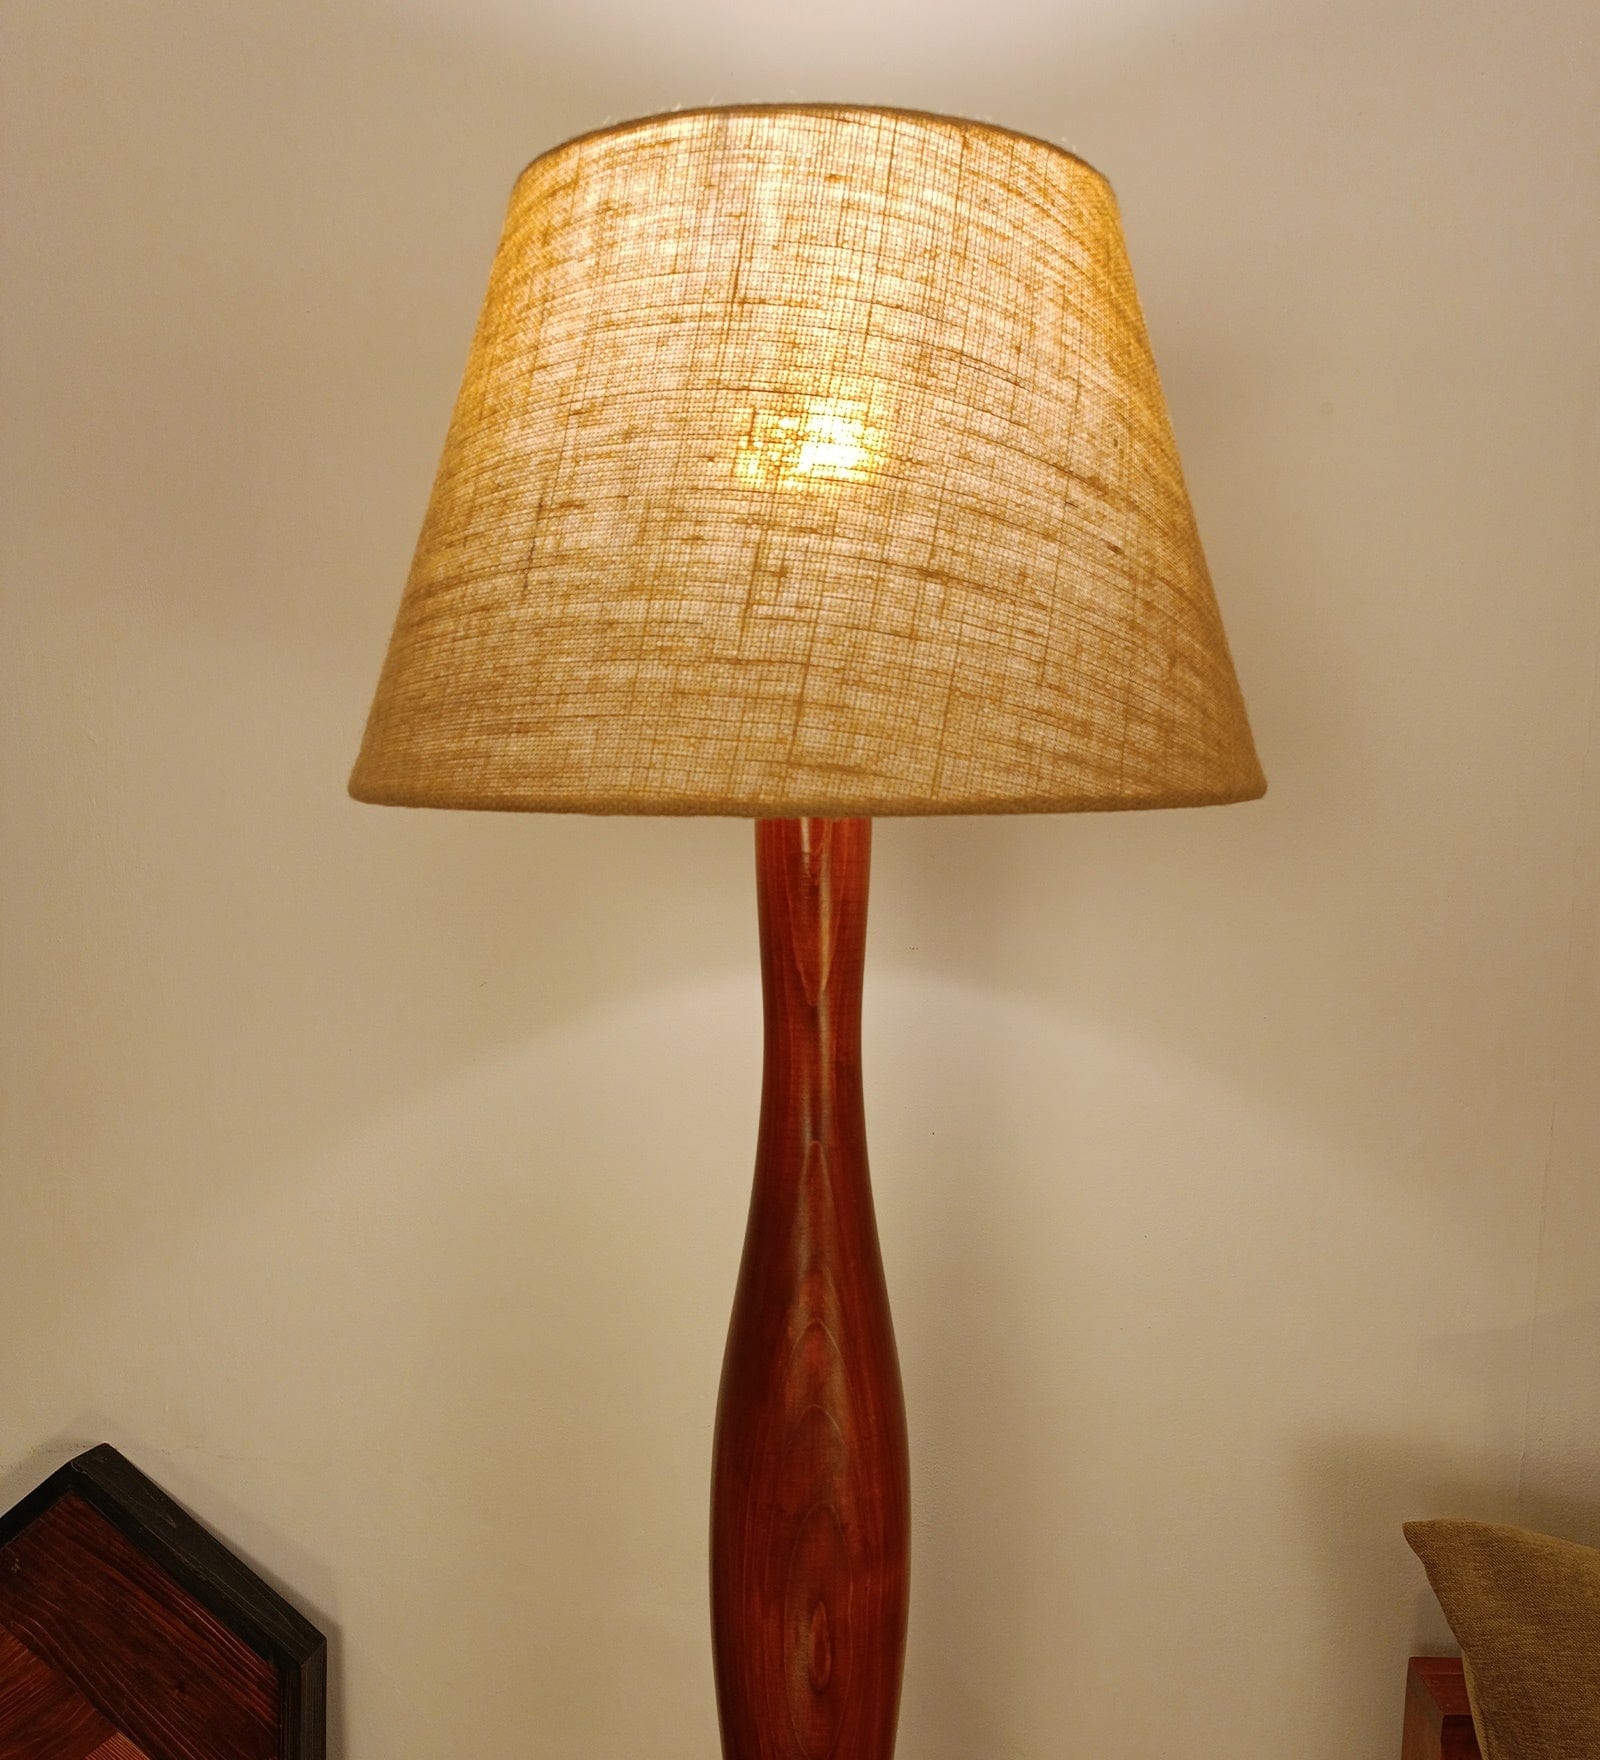 Aristro Wooden Floor Lamp with Brown Base and Jute Fabric Lampshade (BULB NOT INCLUDED)